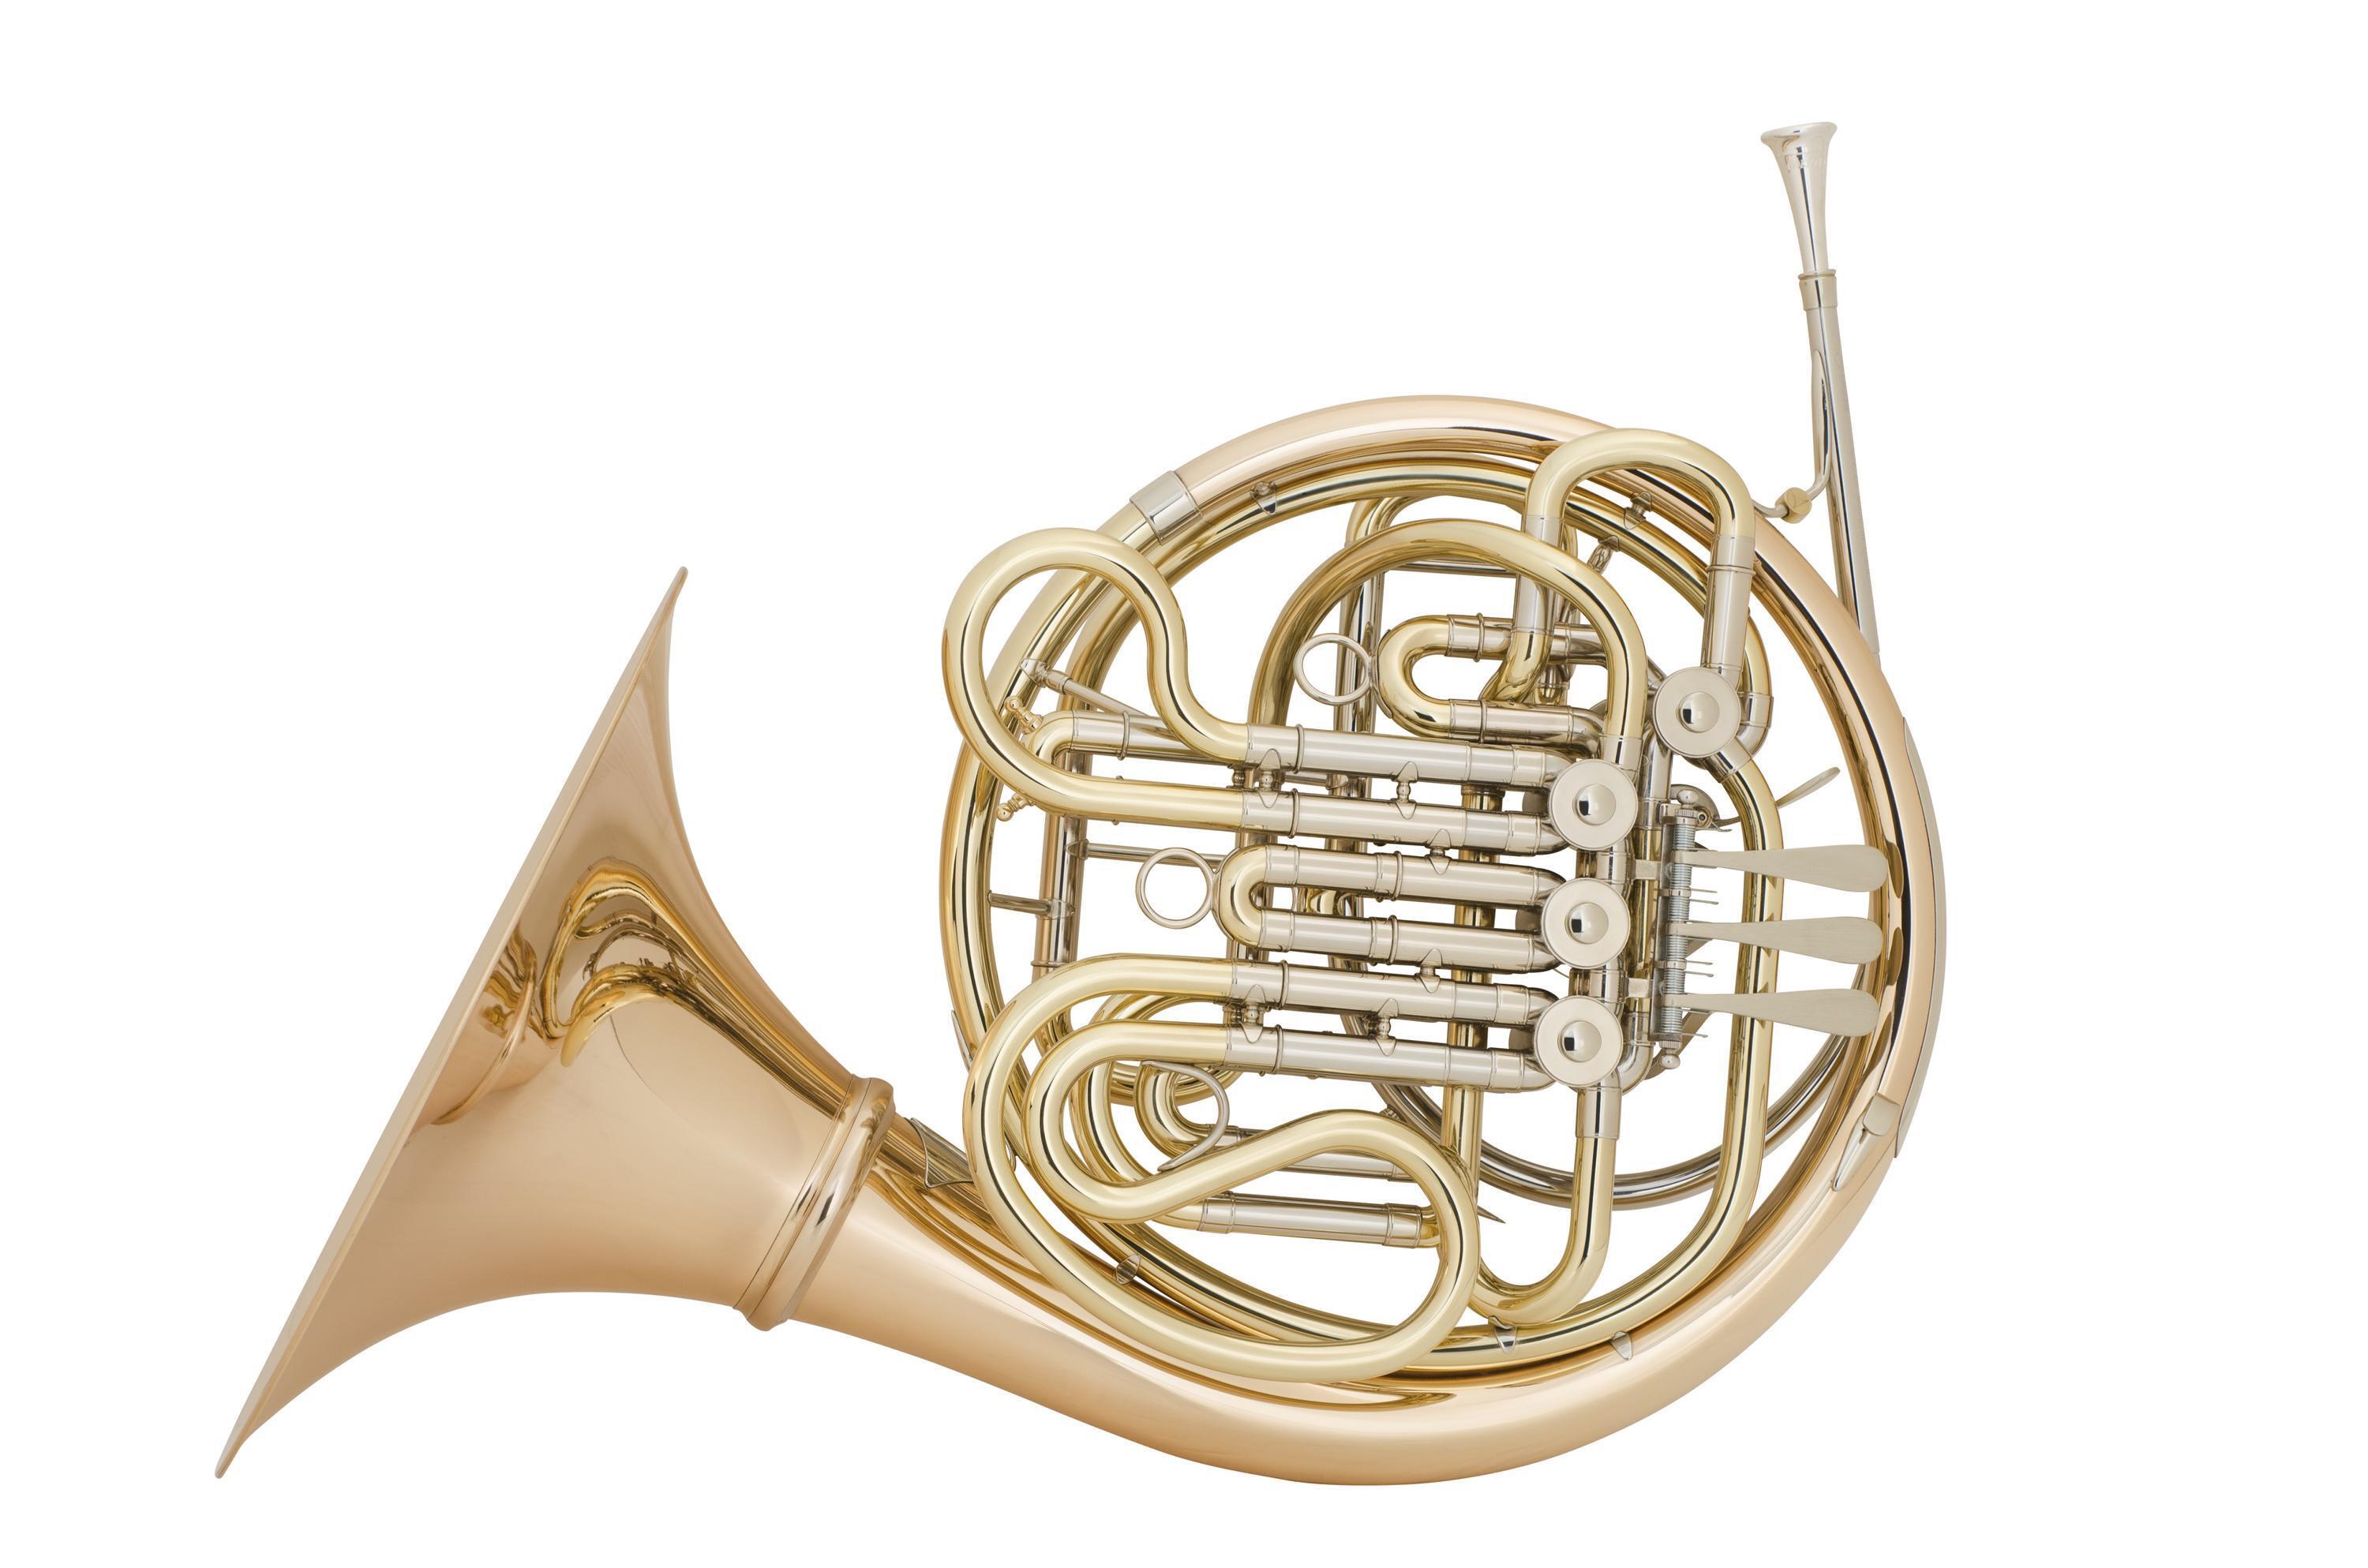 French Horn Gig and Events Information Exchange